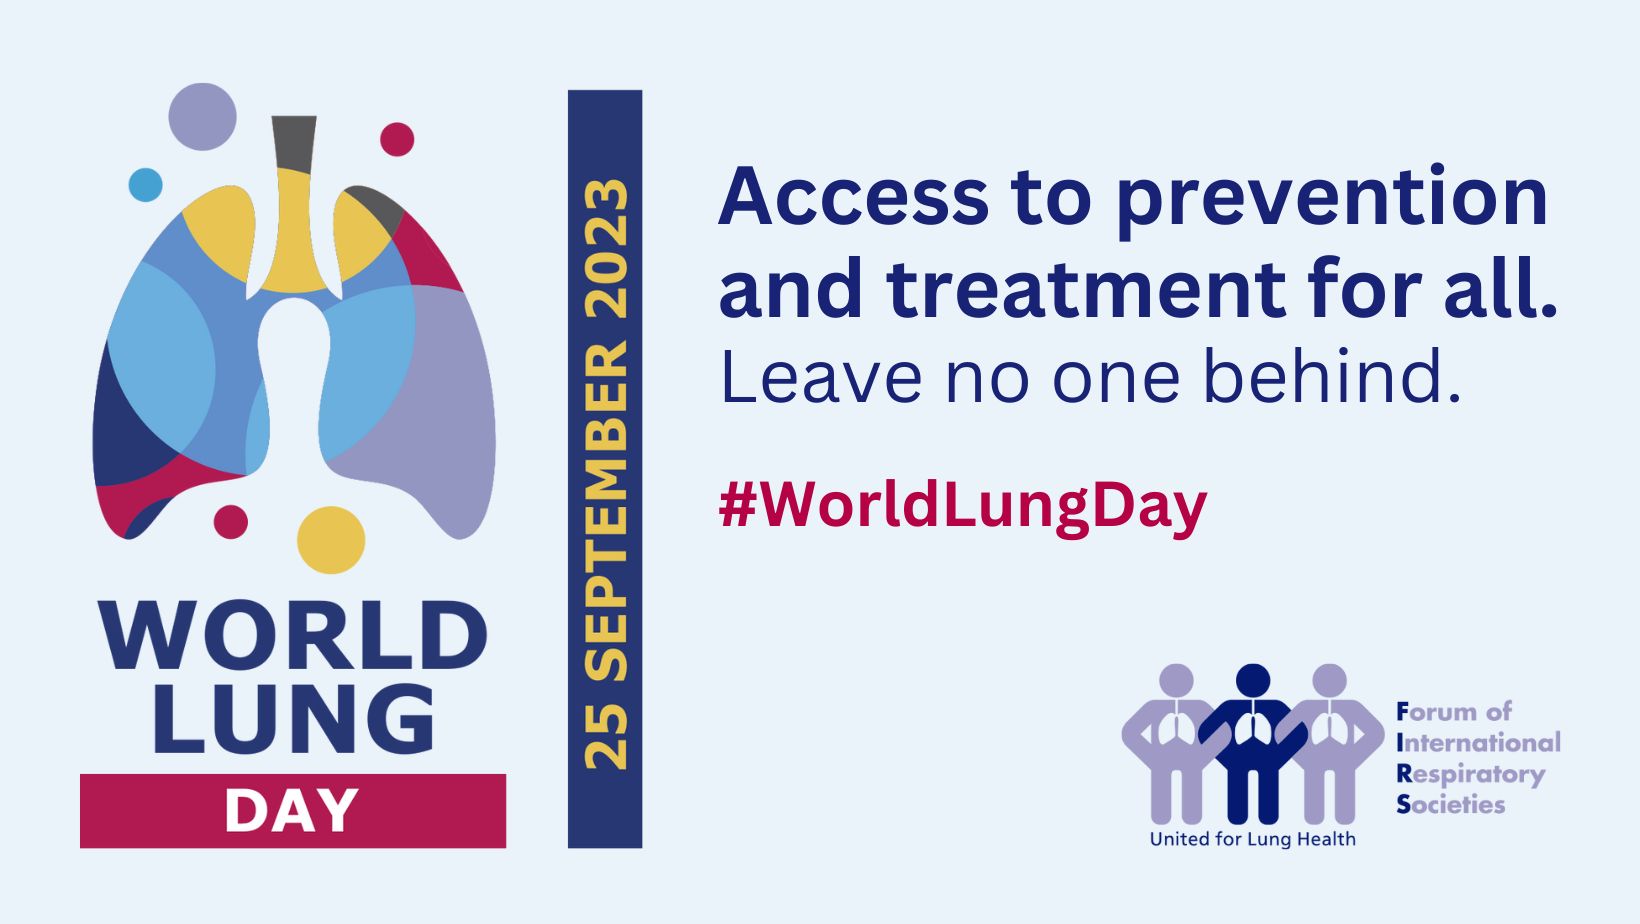 FIRS world lung day